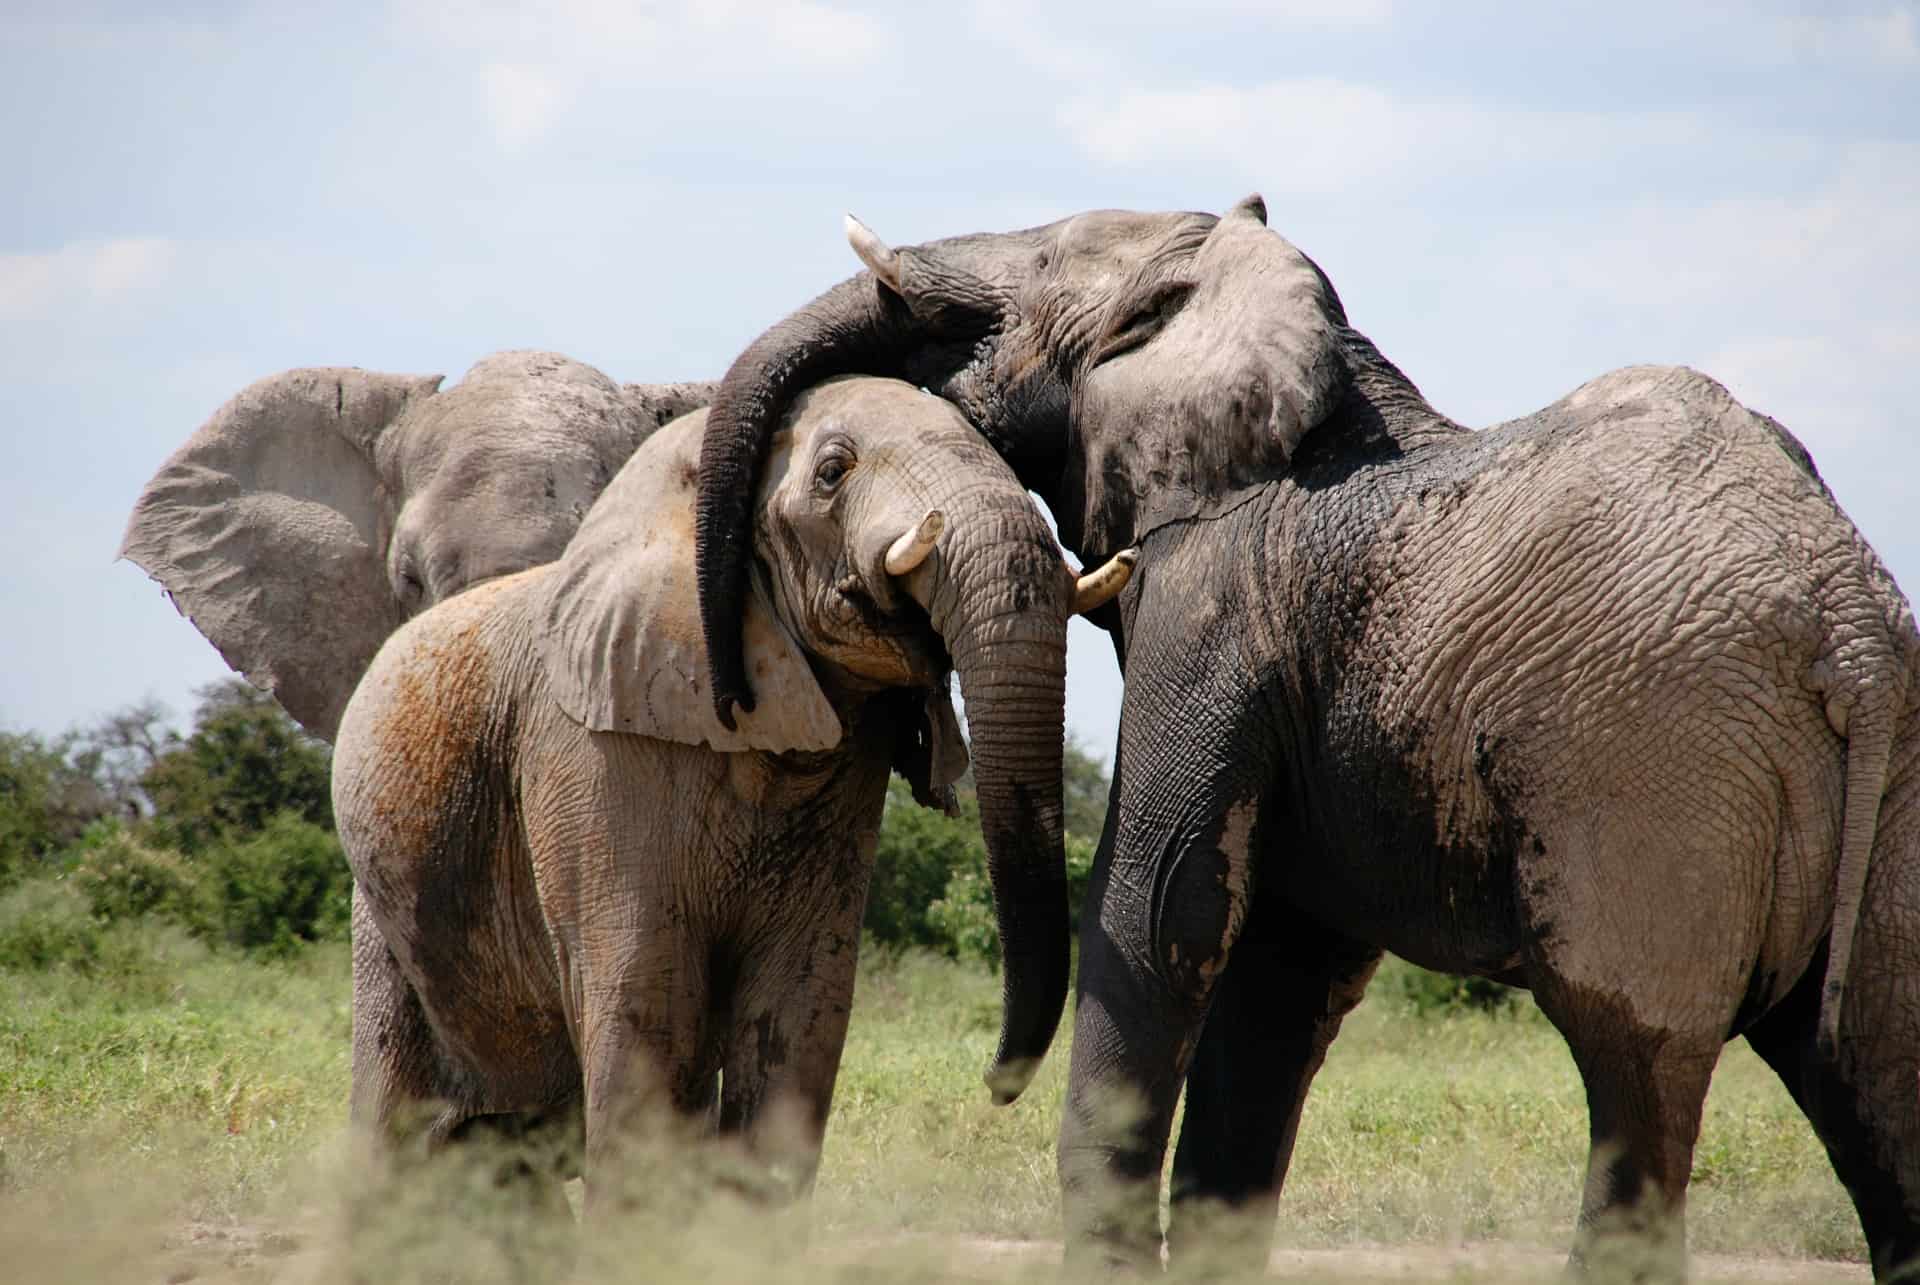 A 180 in Botswana: The End to the Ban on Elephant Hunting